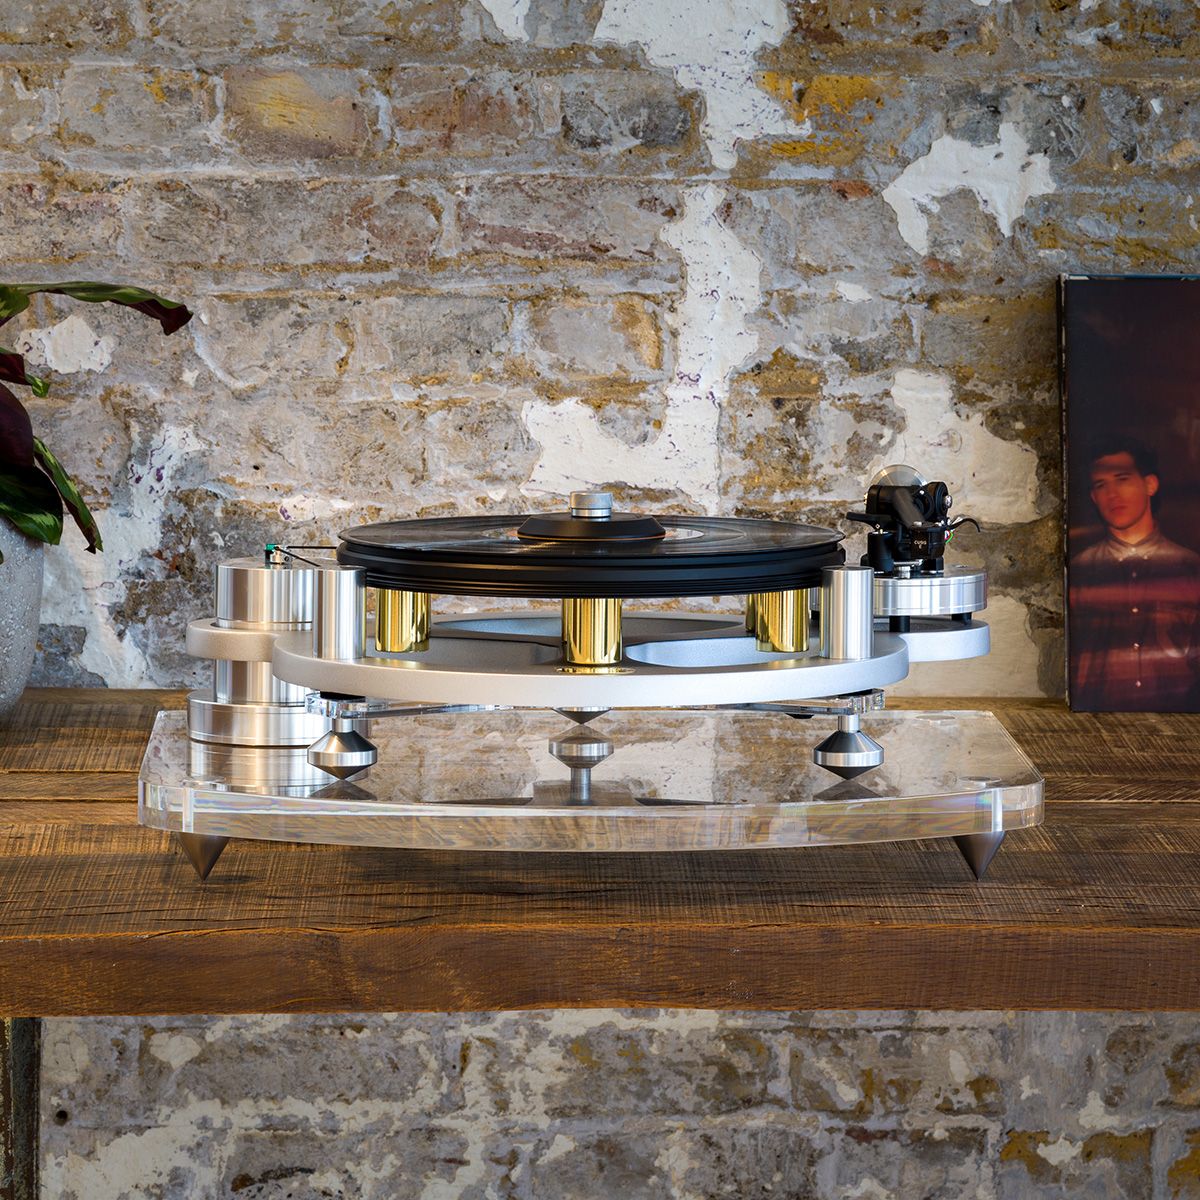 Michell Gyro SE turntable in silver on Iso Base sitting on table in front of brick wall